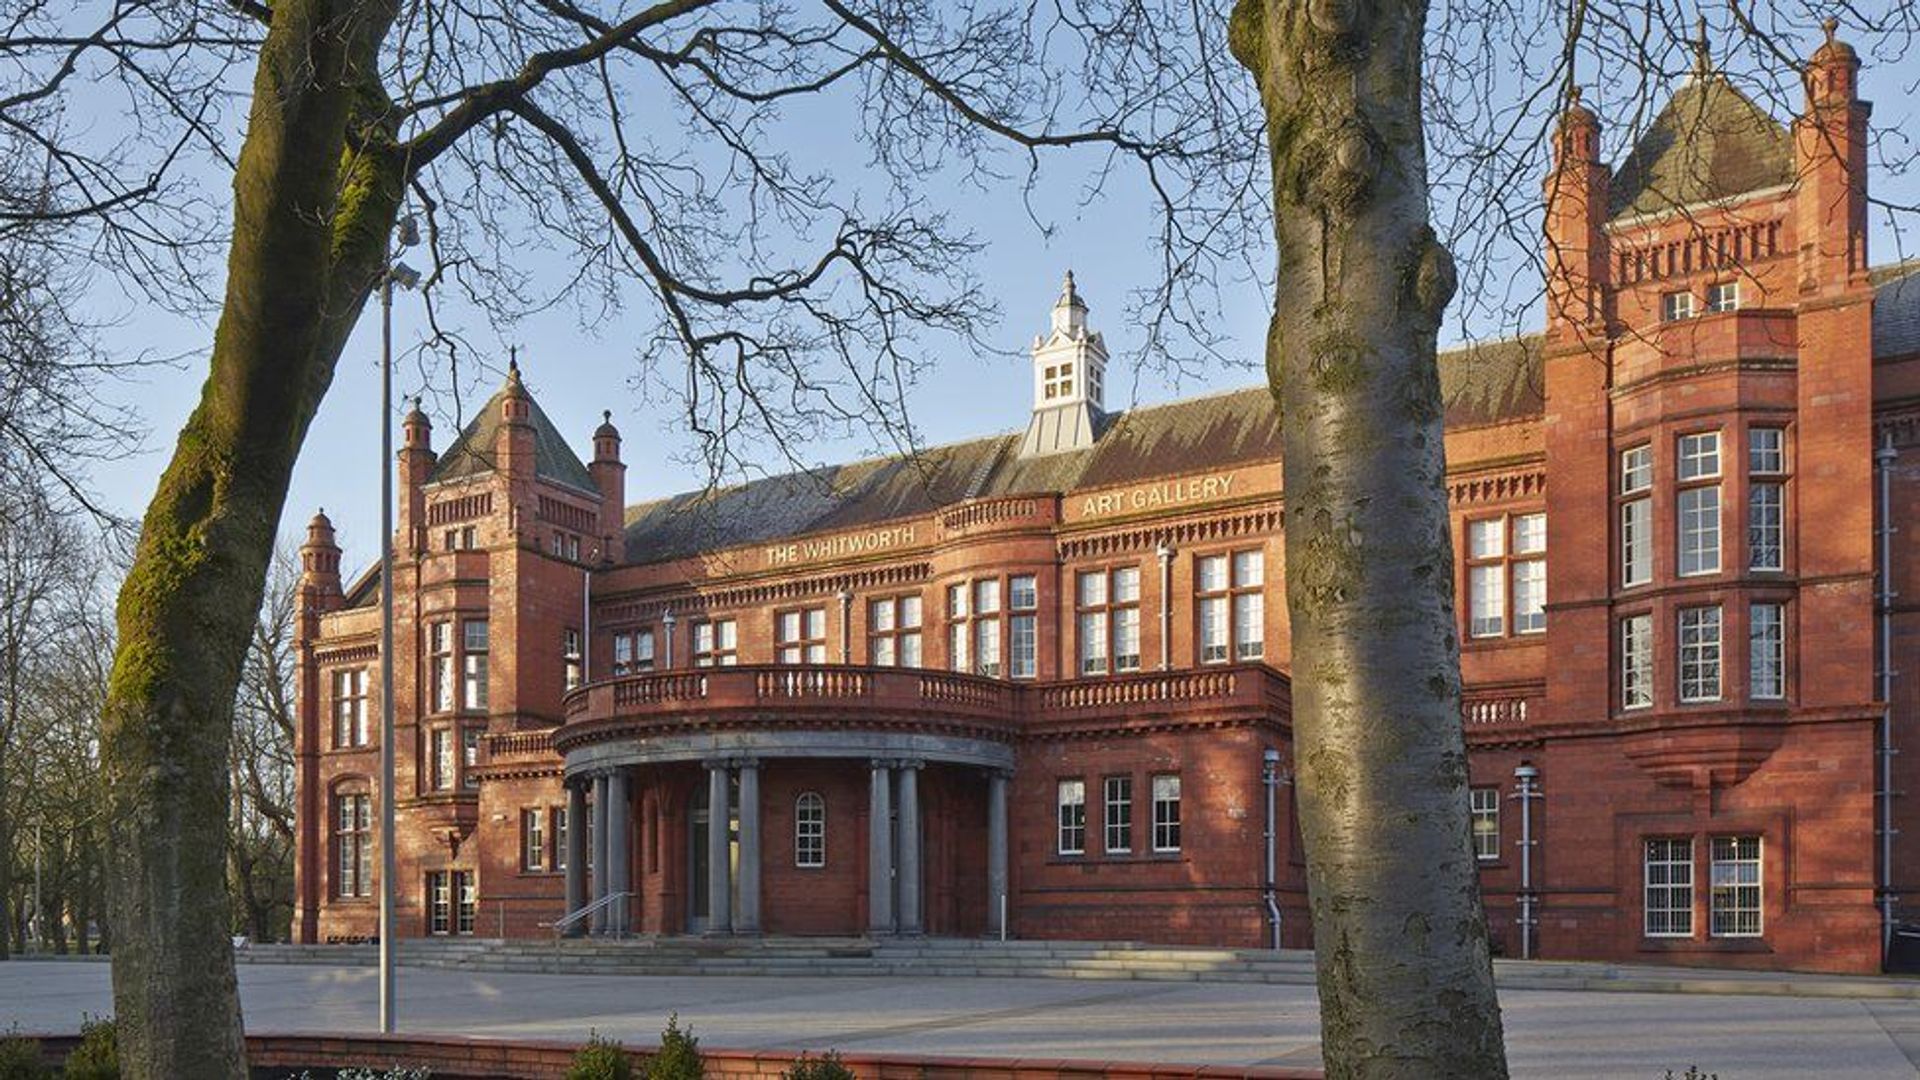 The Whitworth Art Gallery in Manchester has been accused of "provoking racial discord" Photo: Alan Williams